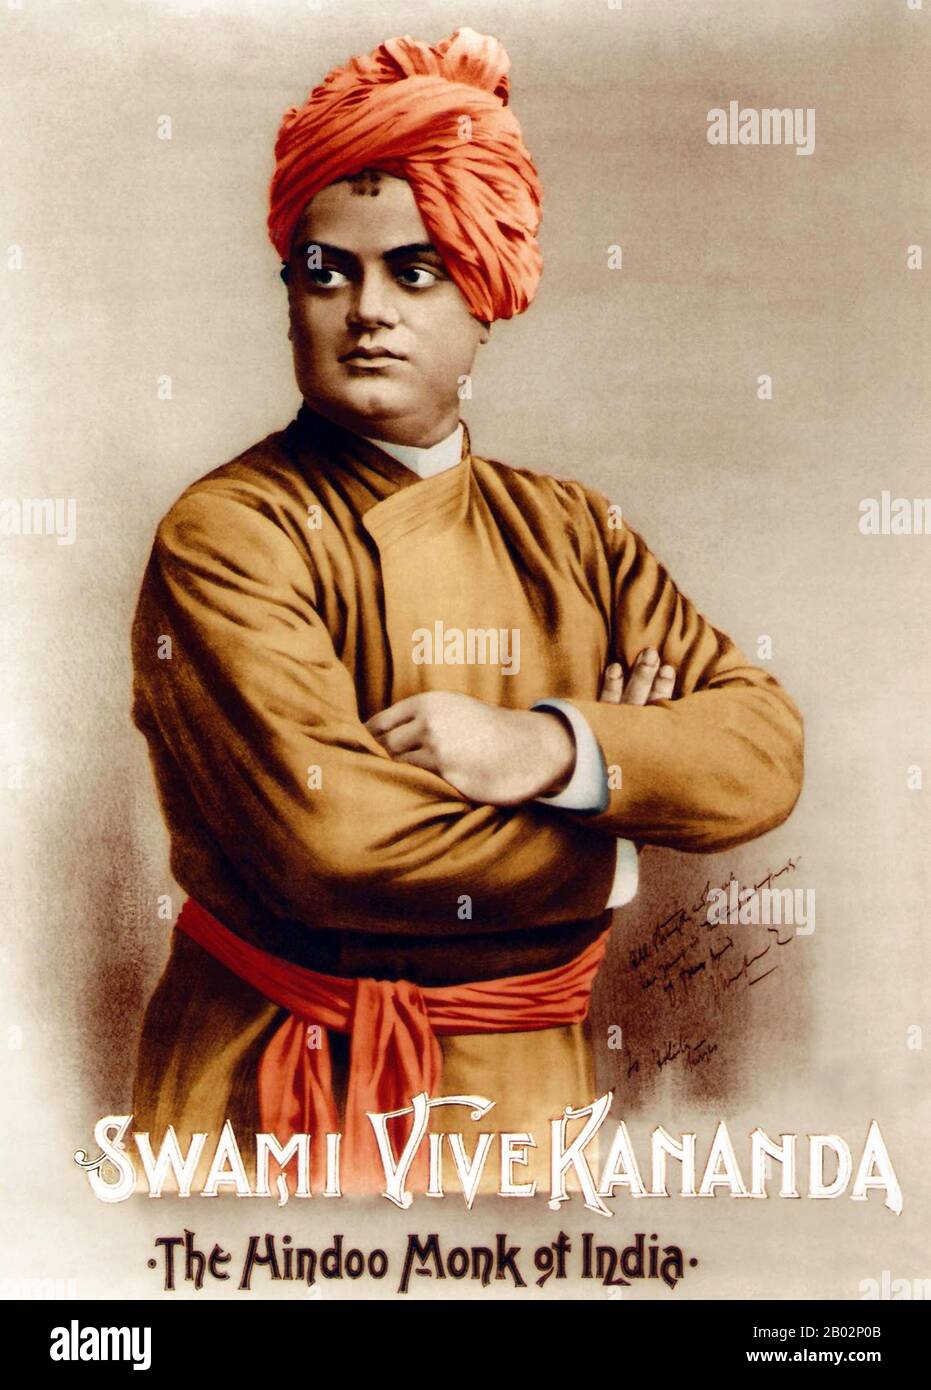 Swami Vivekananda (12 January 1863 – 4 July 1902), born Narendra Nath Datta, was an Indian Hindu monk and chief disciple of the 19th-century saint Ramakrishna. He was a key figure in the introduction of the Indian philosophies of Vedanta and Yoga to the western world and was credited with raising interfaith awareness, bringing Hinduism to the status of a major world religion in the late 19th century.  He was a major force in the revival of Hinduism in India and contributed to the notion of nationalism in colonial India. Vivekananda founded the Ramakrishna Math and the Ramakrishna Mission. He i Stock Photo